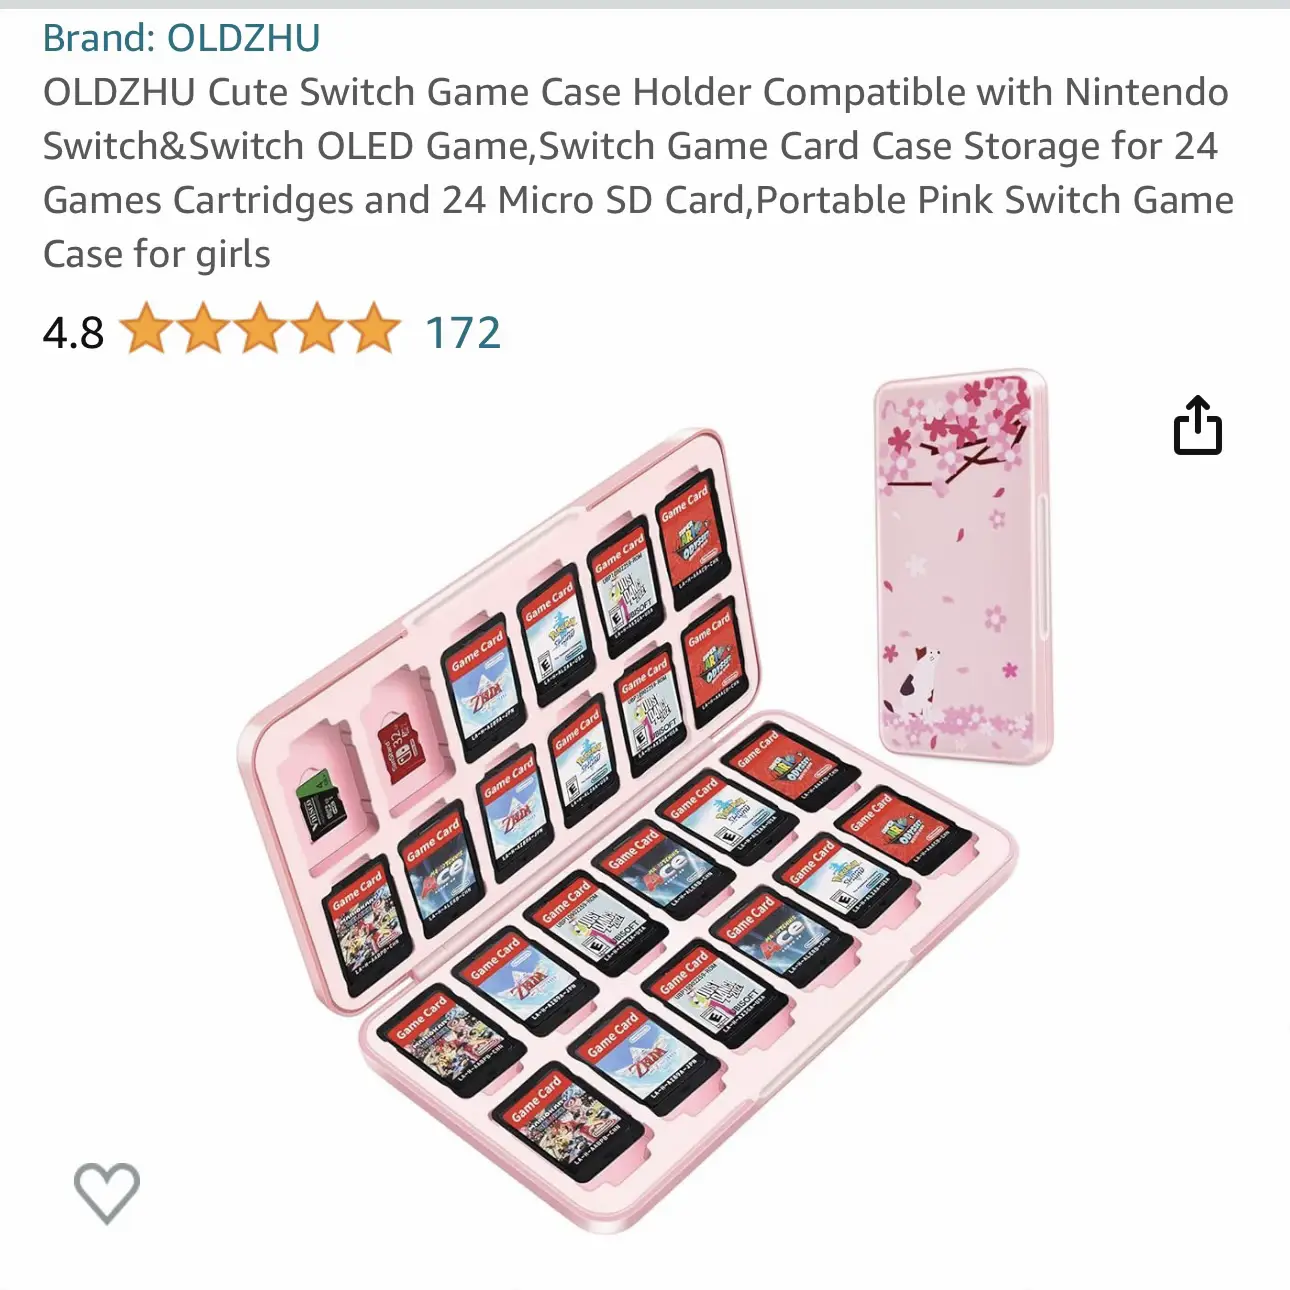 OLDZHU Cute Switch Game Case Holder Compatible with Nintendo Switch&Switch  OLED Game,Switch Game Card Case Storage for 24 Games Cartridges and 24